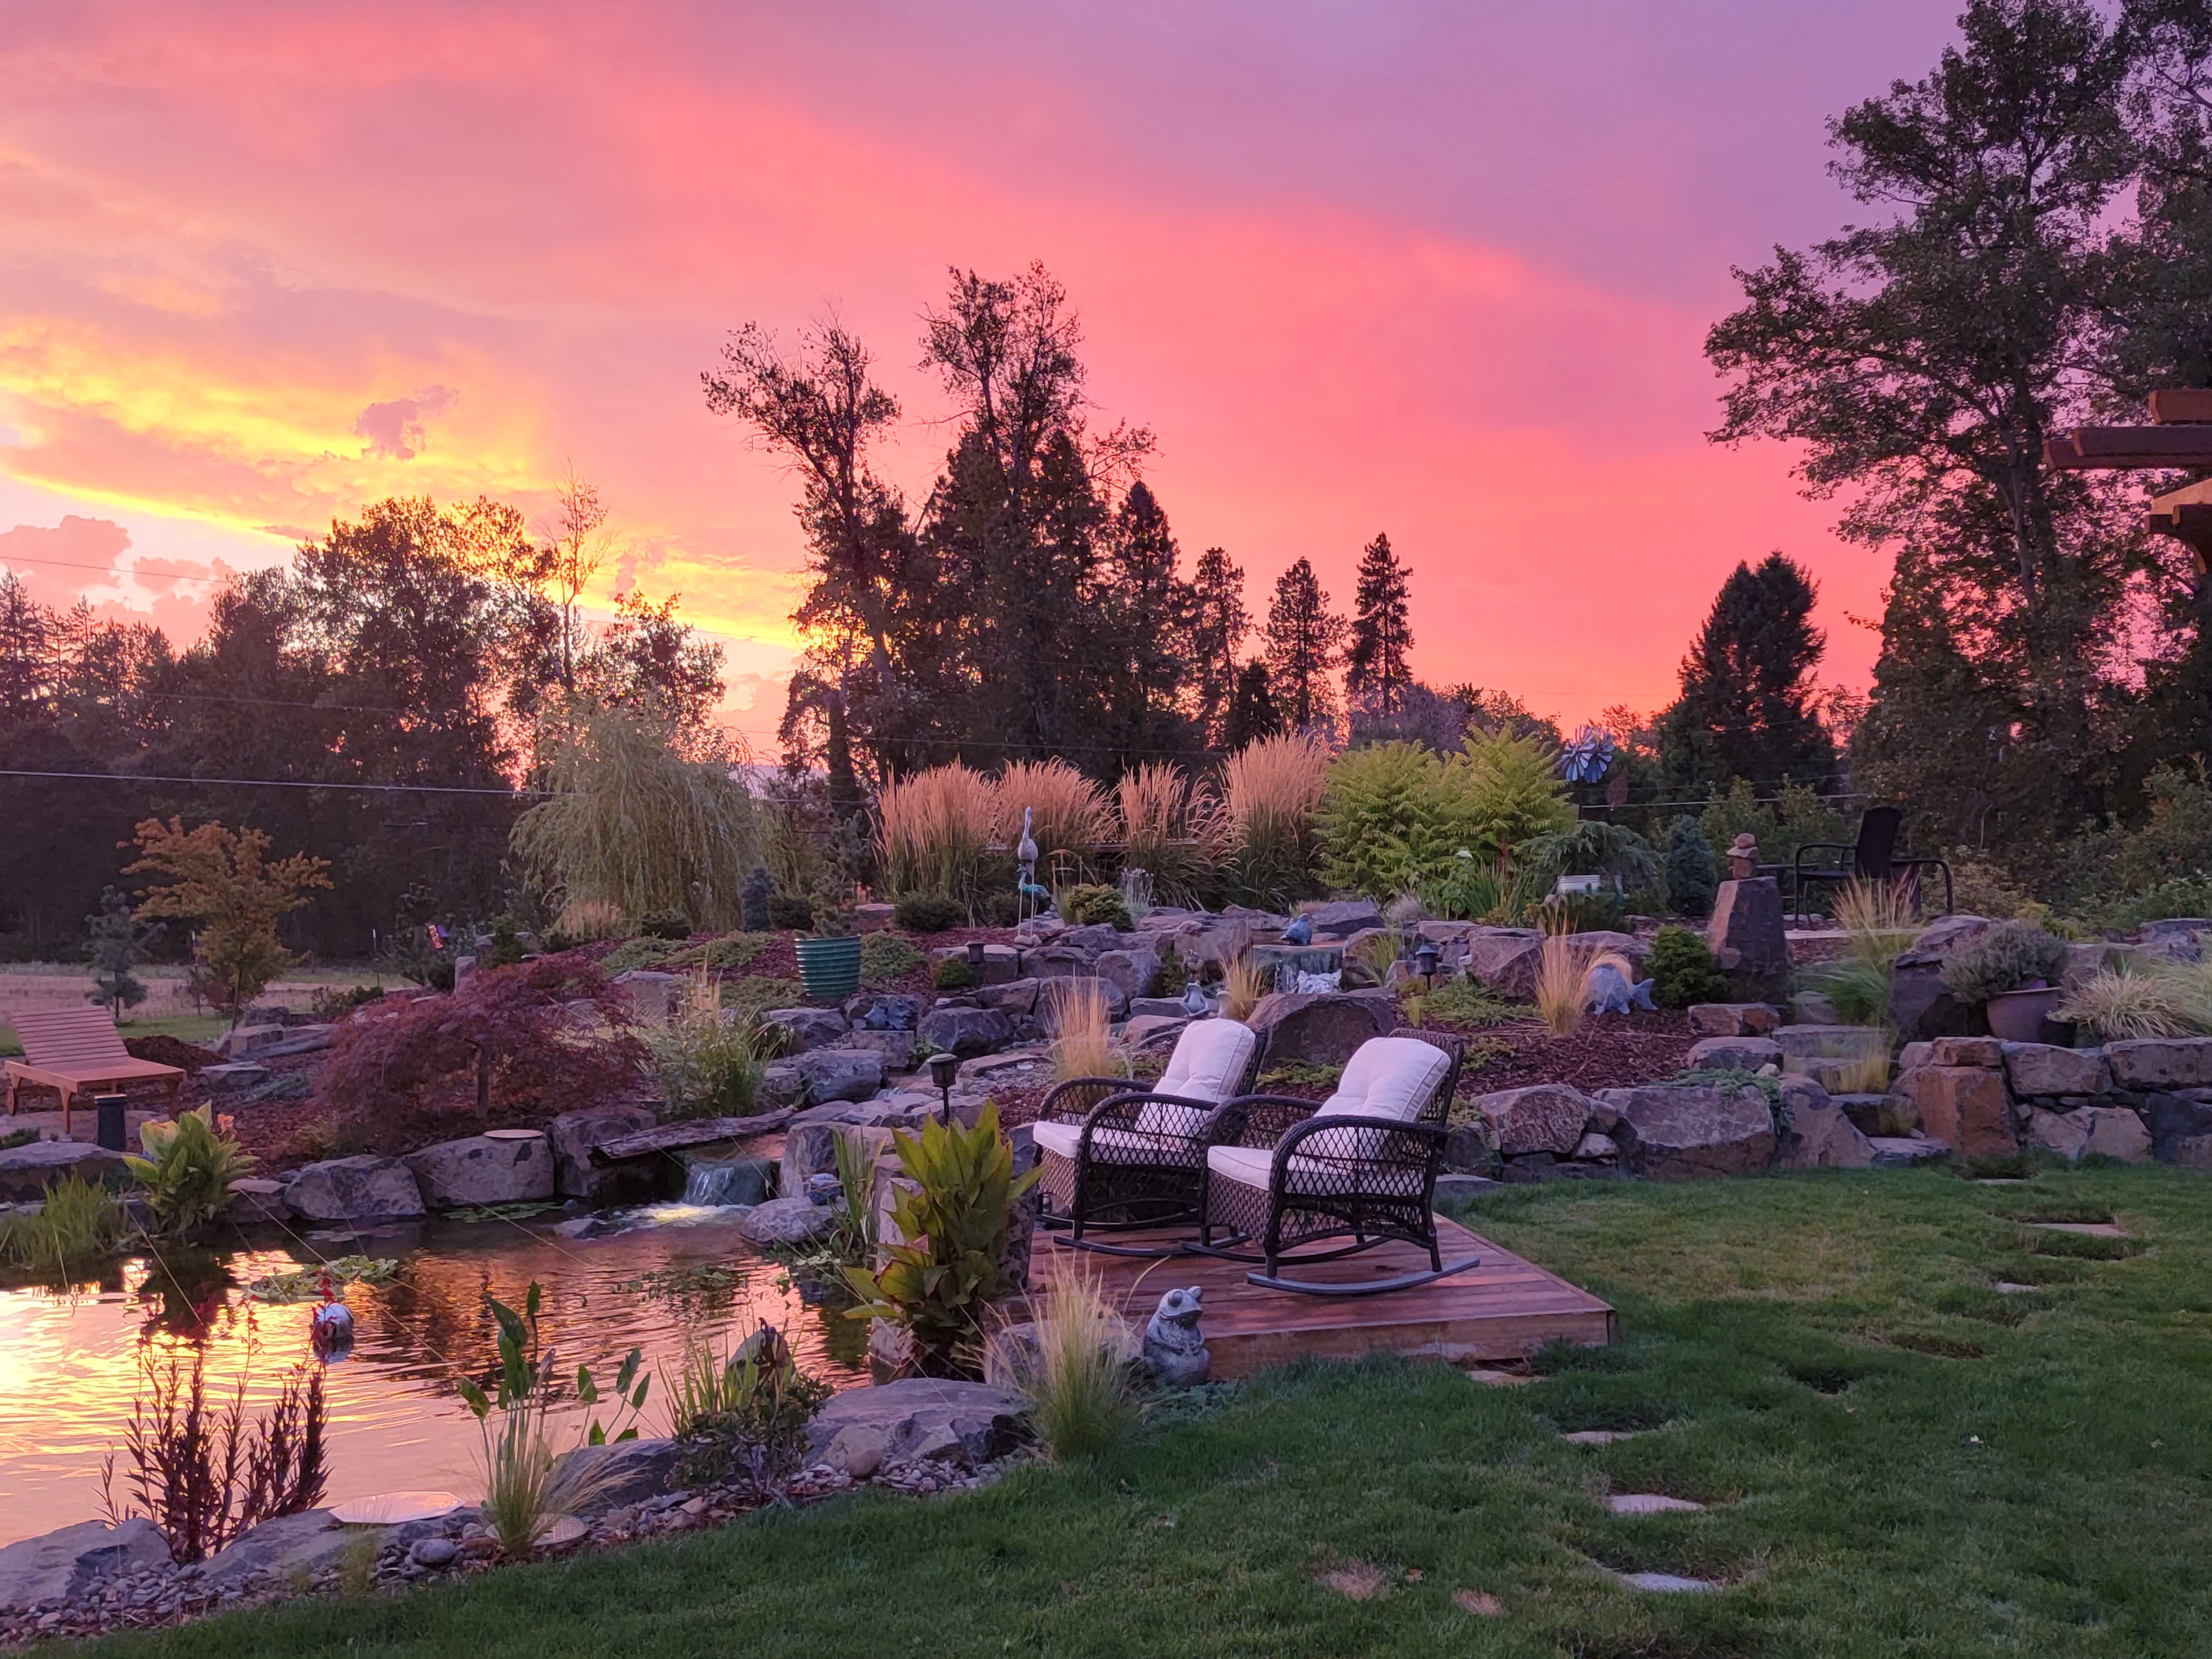 Koi Pond at Sunset Andreatta Waterscapes Grants Pass Oregon